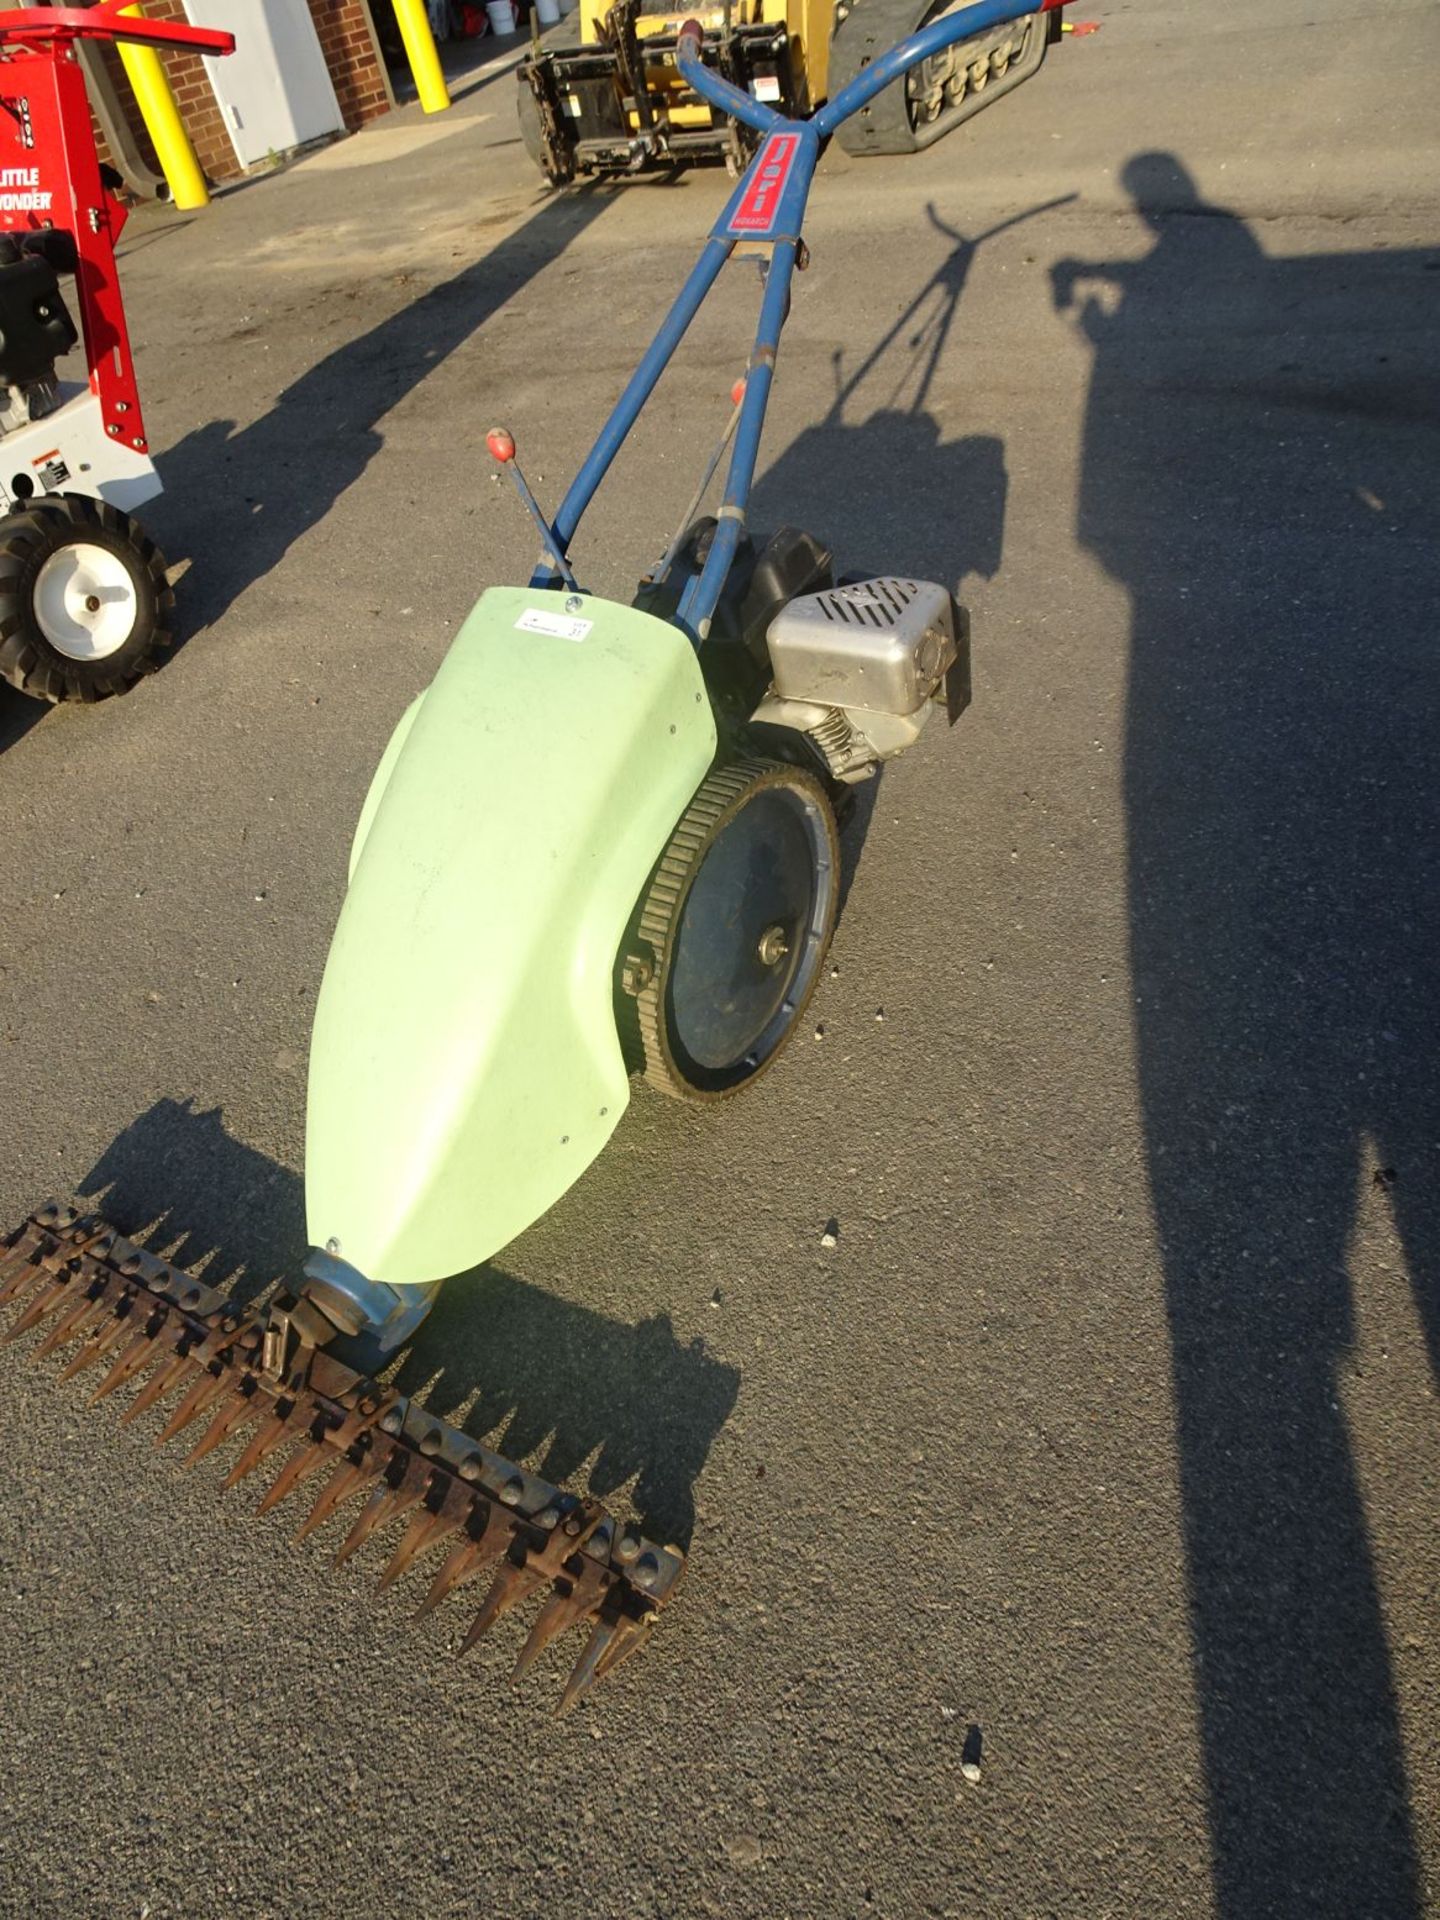 Jari Monarch 30" Sickle Bar Mower With Briggs and Stratton Intek Series 206 5.5hp OHV Motor - Image 3 of 5